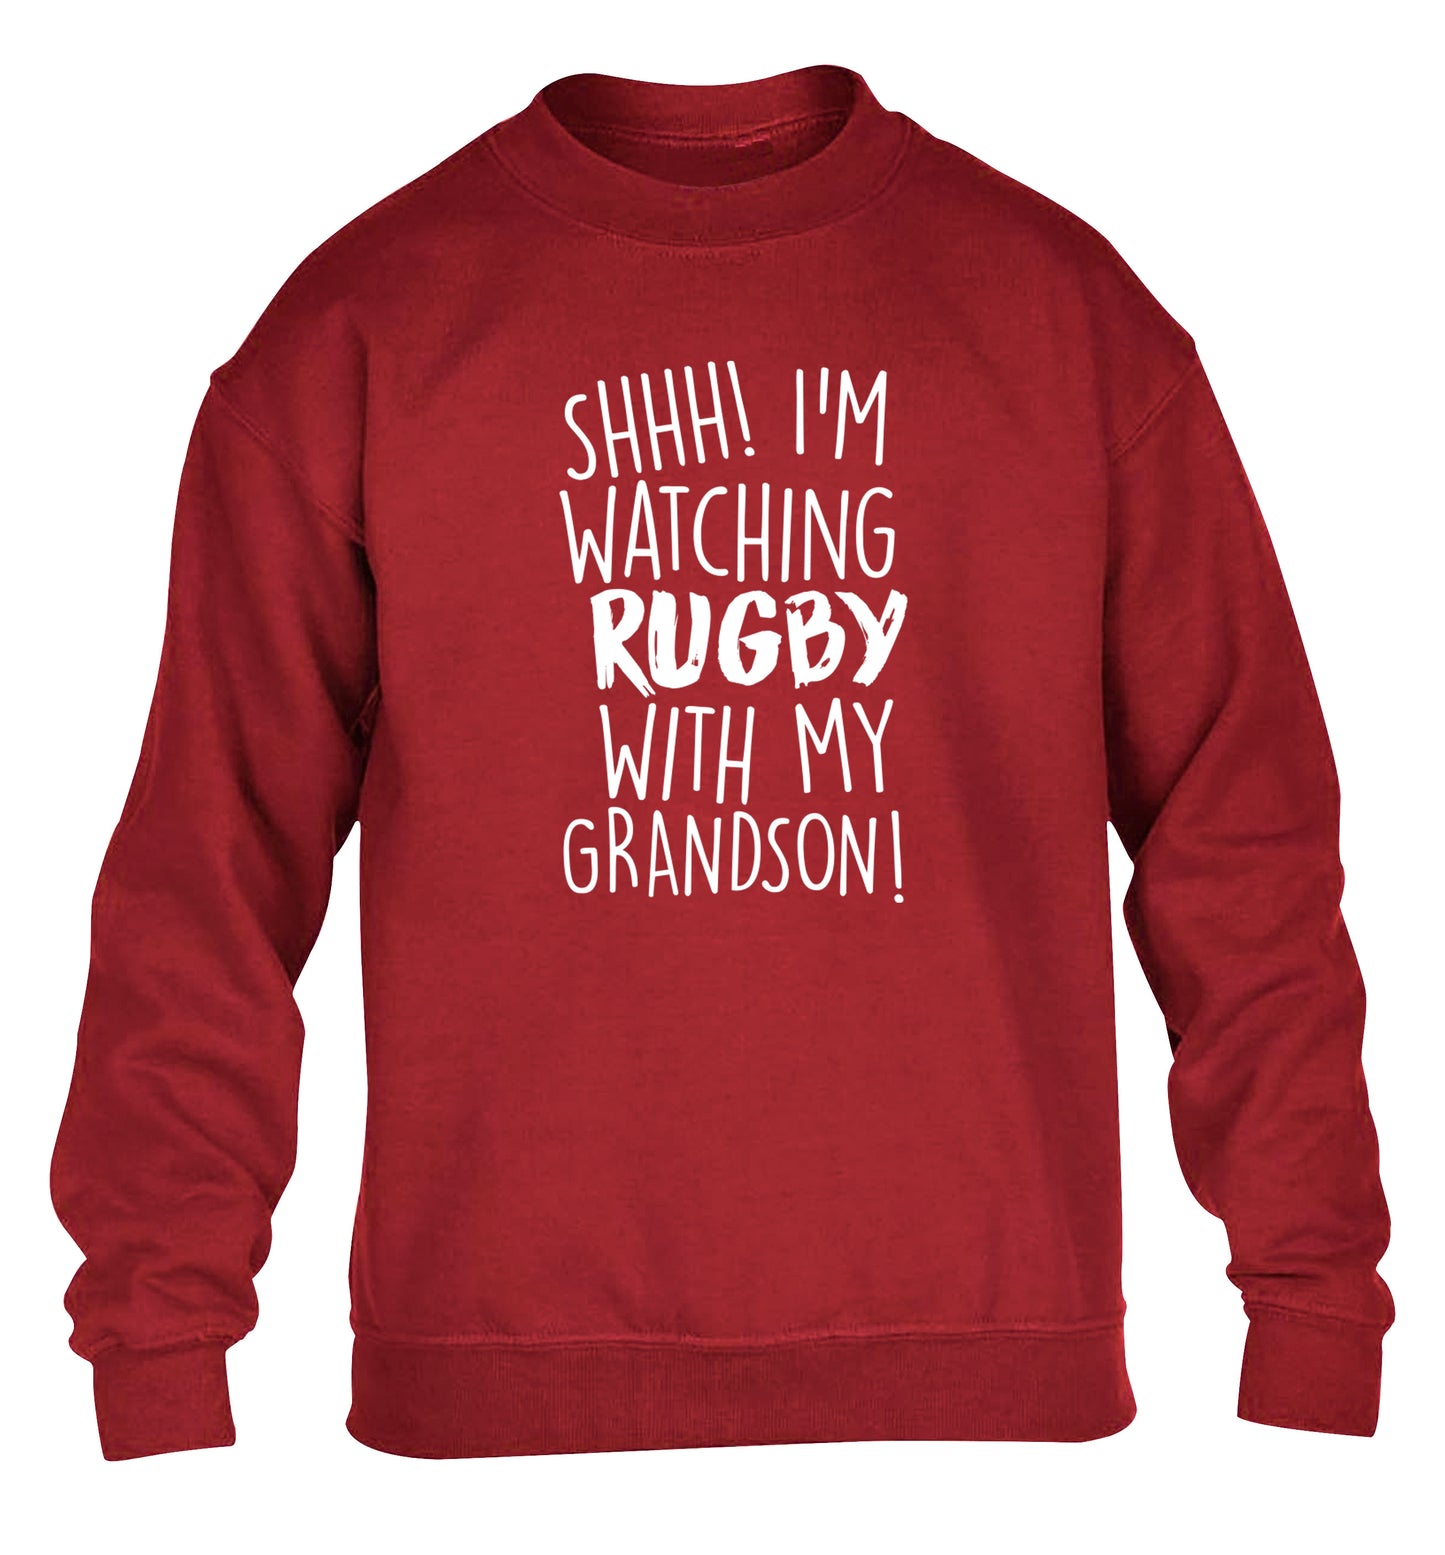 Shh I'm watching rugby with my grandson children's grey sweater 12-13 Years